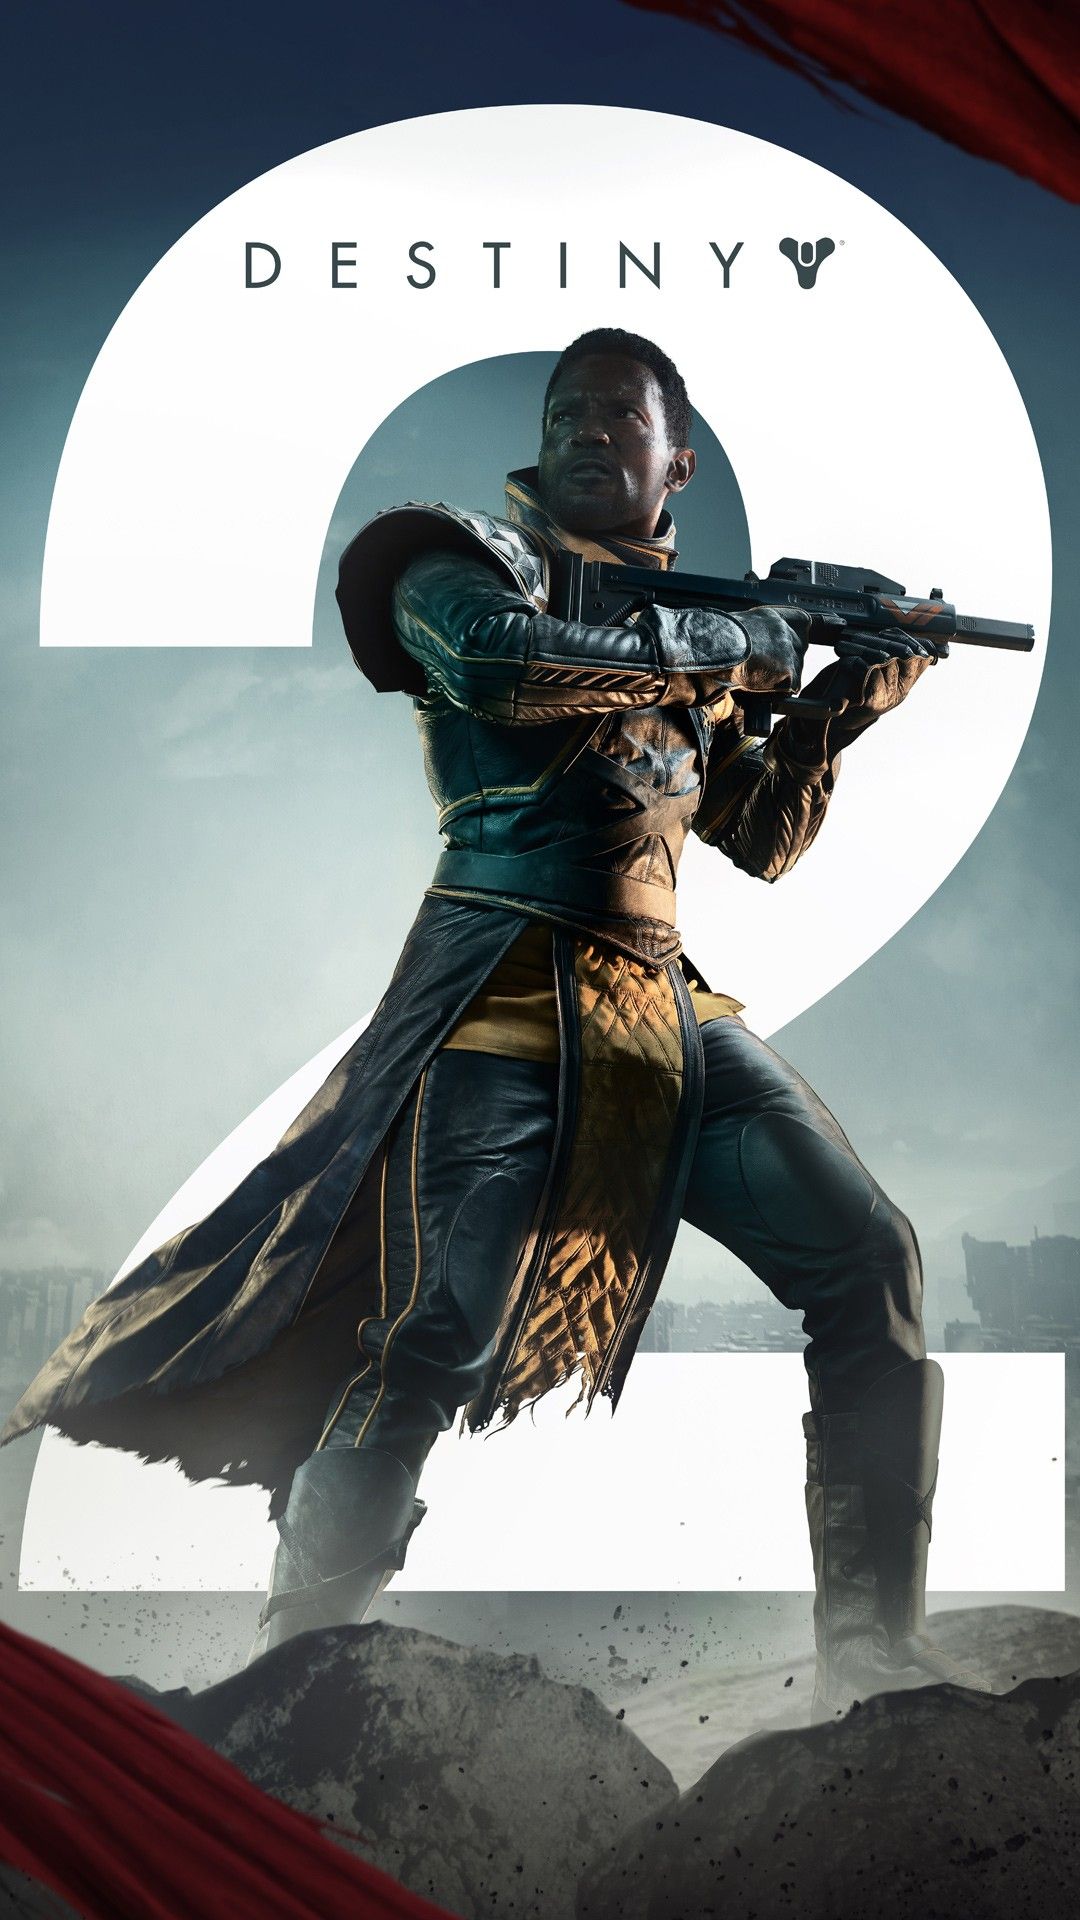 Destiny 2 Warlock 4k wallpaper for iPhone and Android